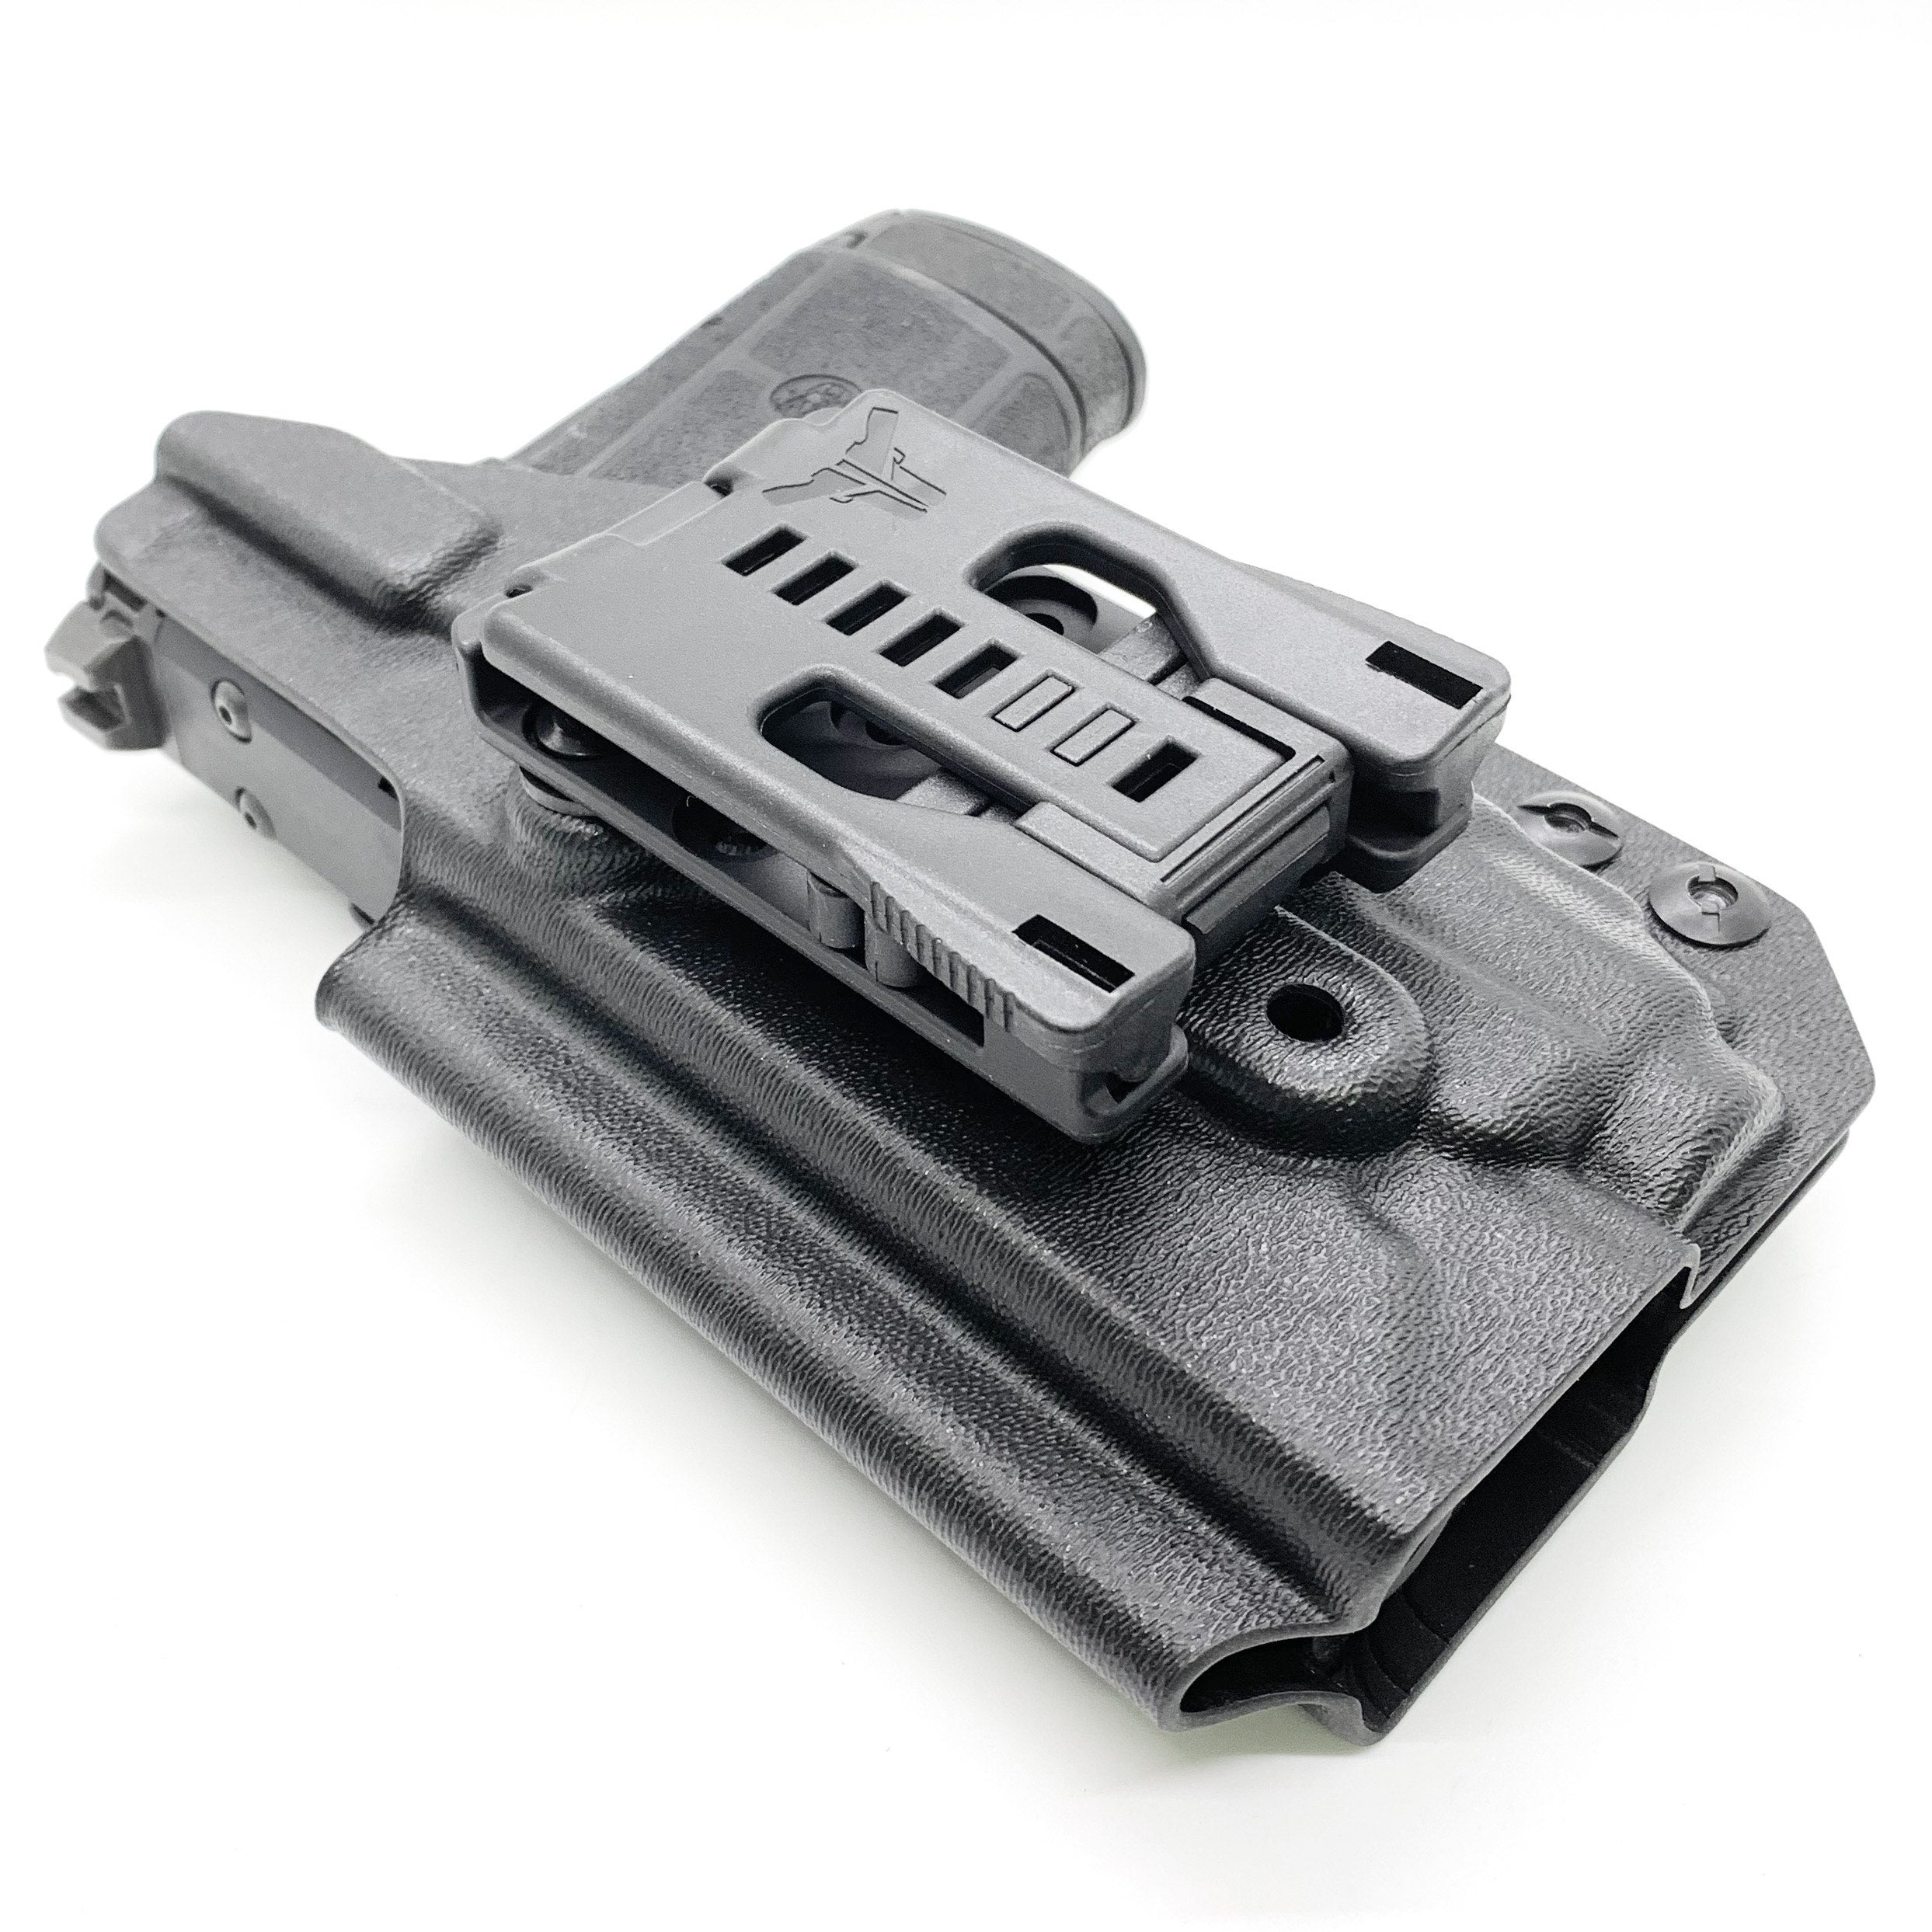 For the best KYDEX OWB Outside Waistband Kydex holster designed to fit the Smith & Wesson EQUALIZER with Streamlight TLR-8 or TLR-8A weapon-mounted light, shop Four Brothers Holsters. Full sweat guard adjustable retention minimal material and smooth edges to reduce printing.  Equalizer S&W TLR8 TLR8A 